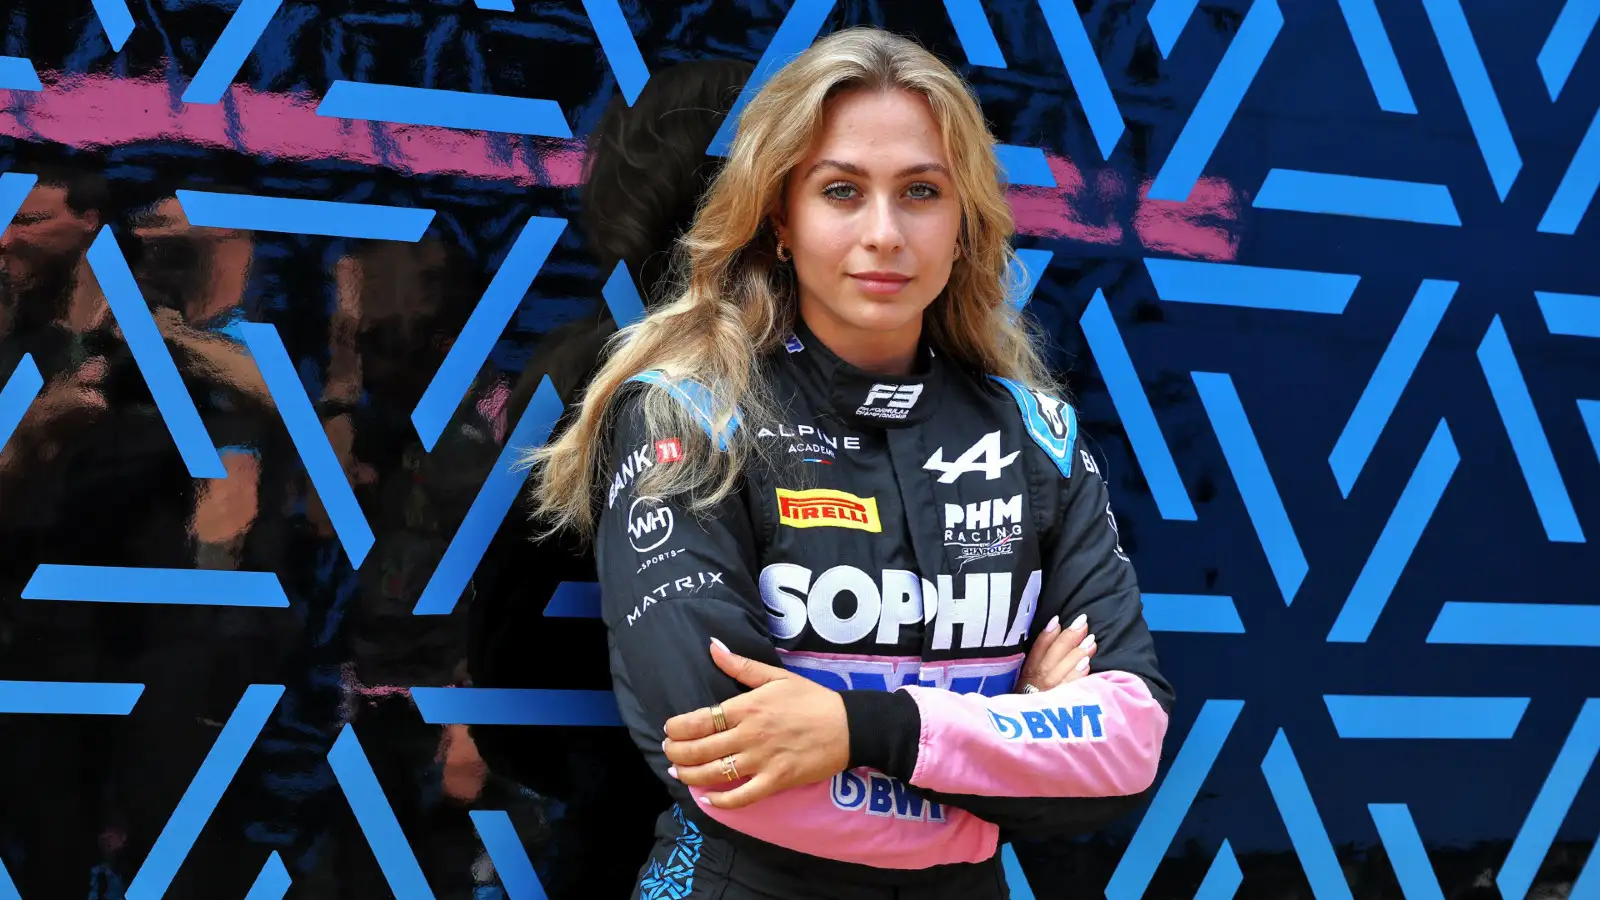 Alpine Academy driver Sophia Floersch has been signed to Van Amersfoort for a fulltime F3 campaign in 2024.